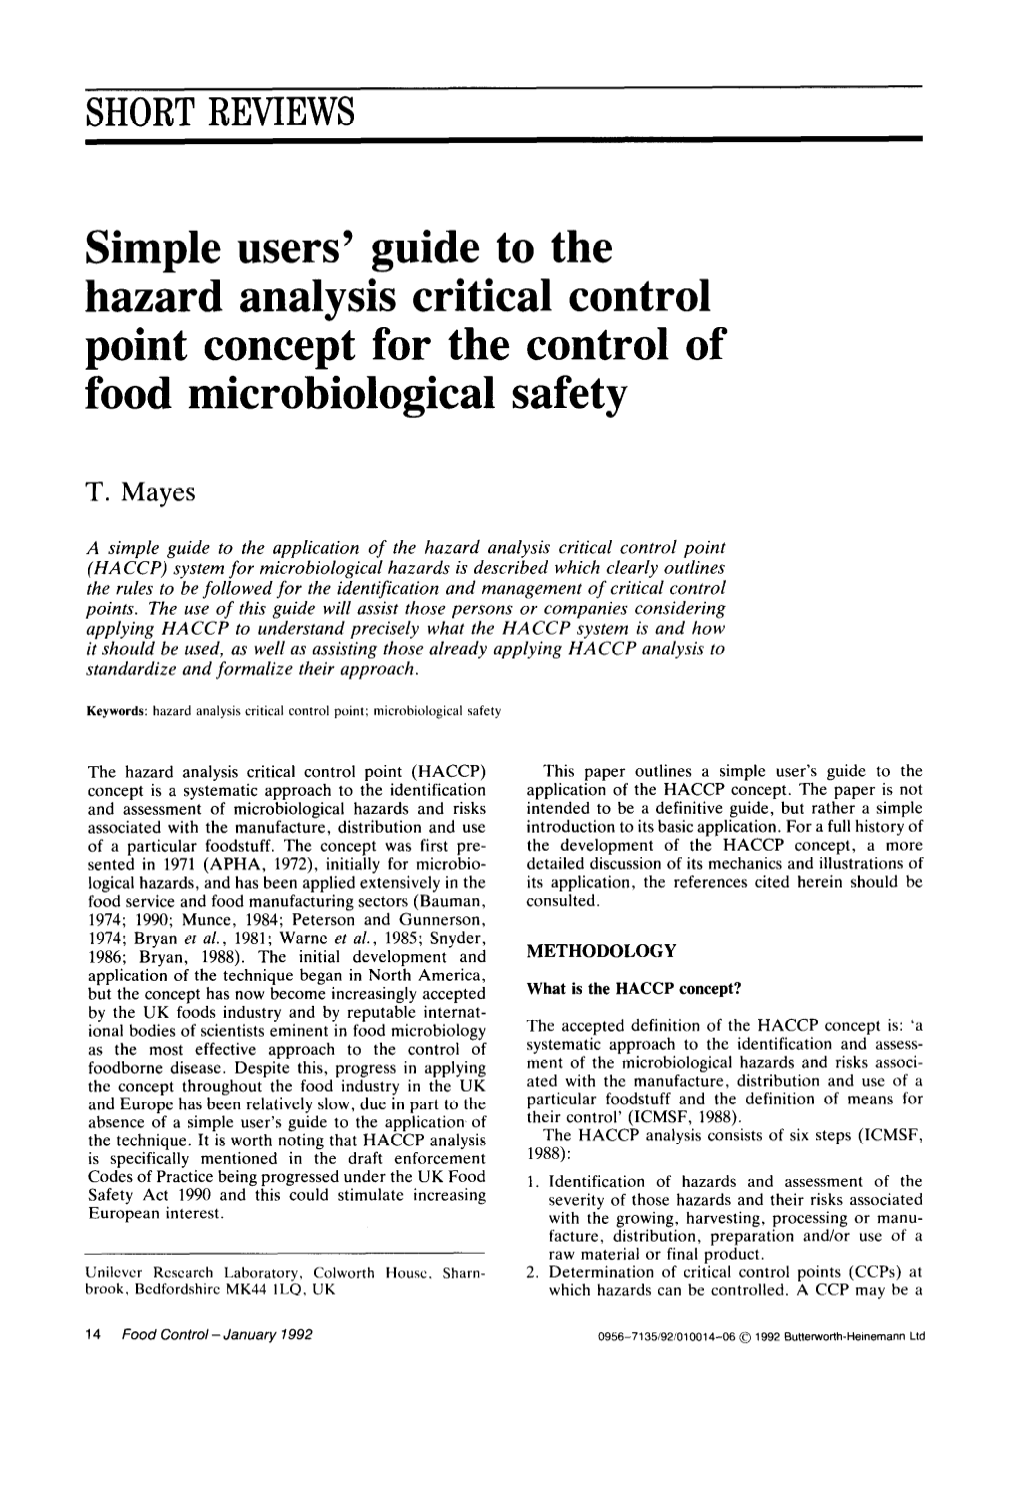 Simple Users' Guide to the Hazard Analysis Critical Control Point